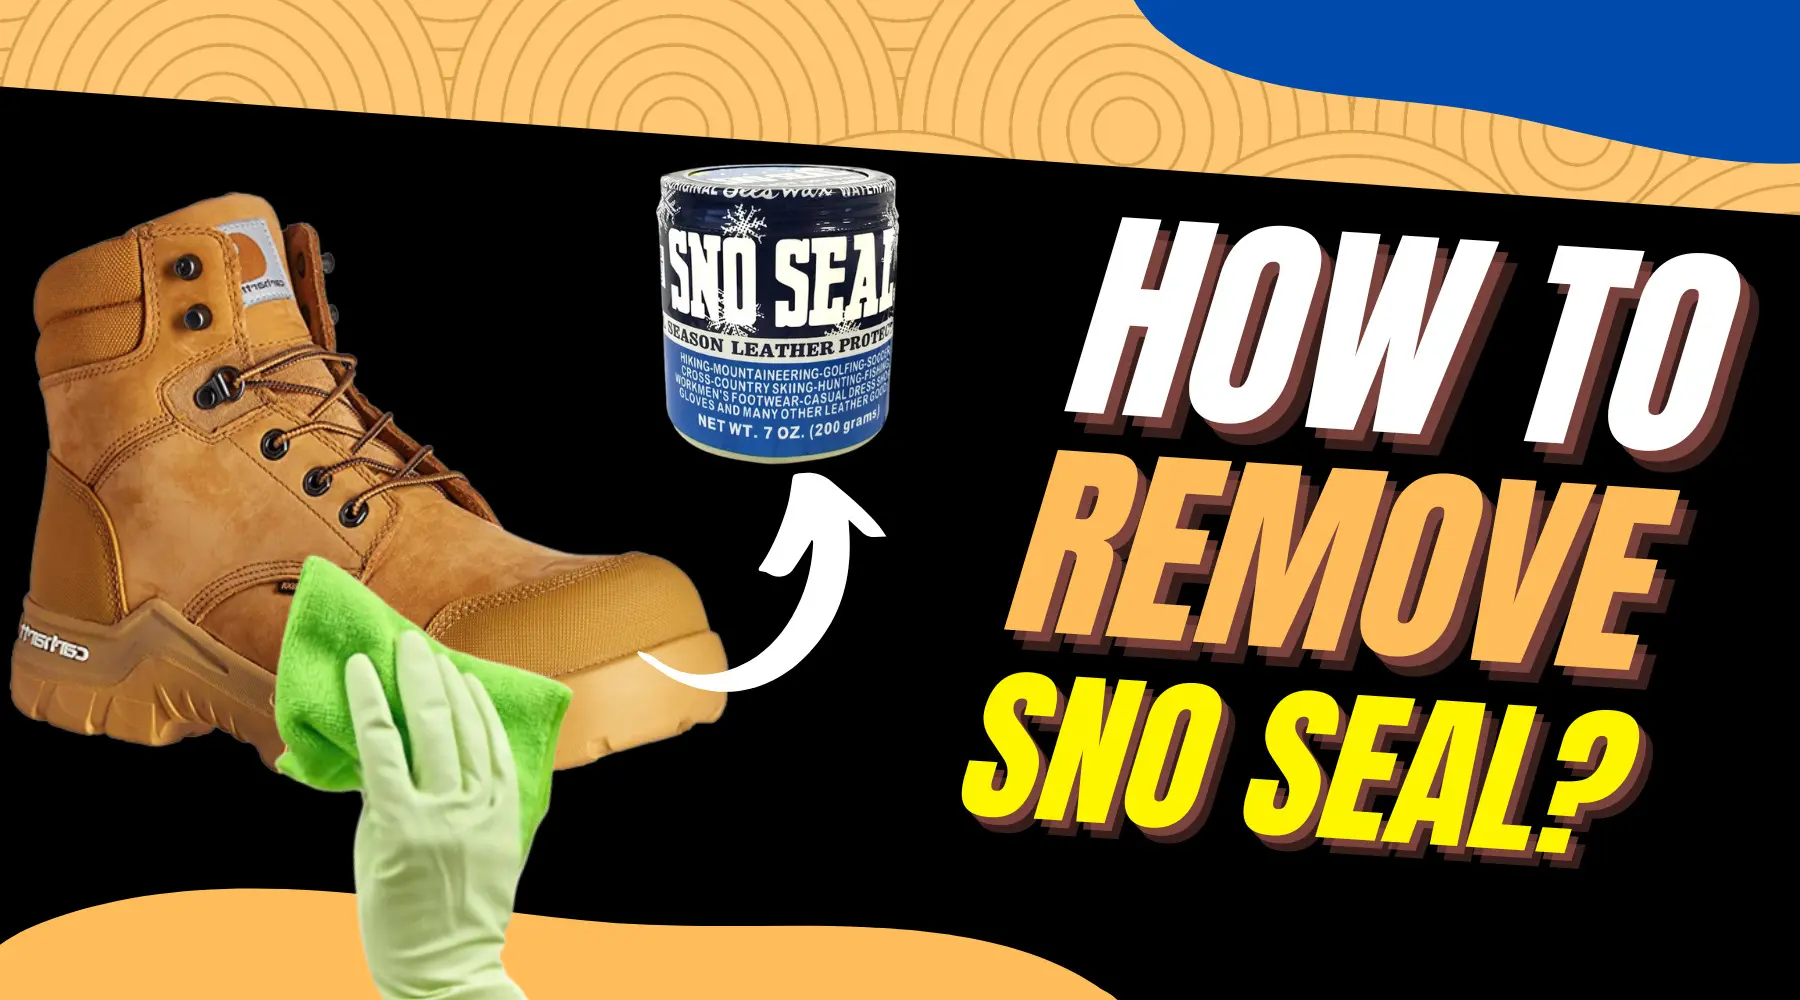 How To Remove Sno Seal From Boots?